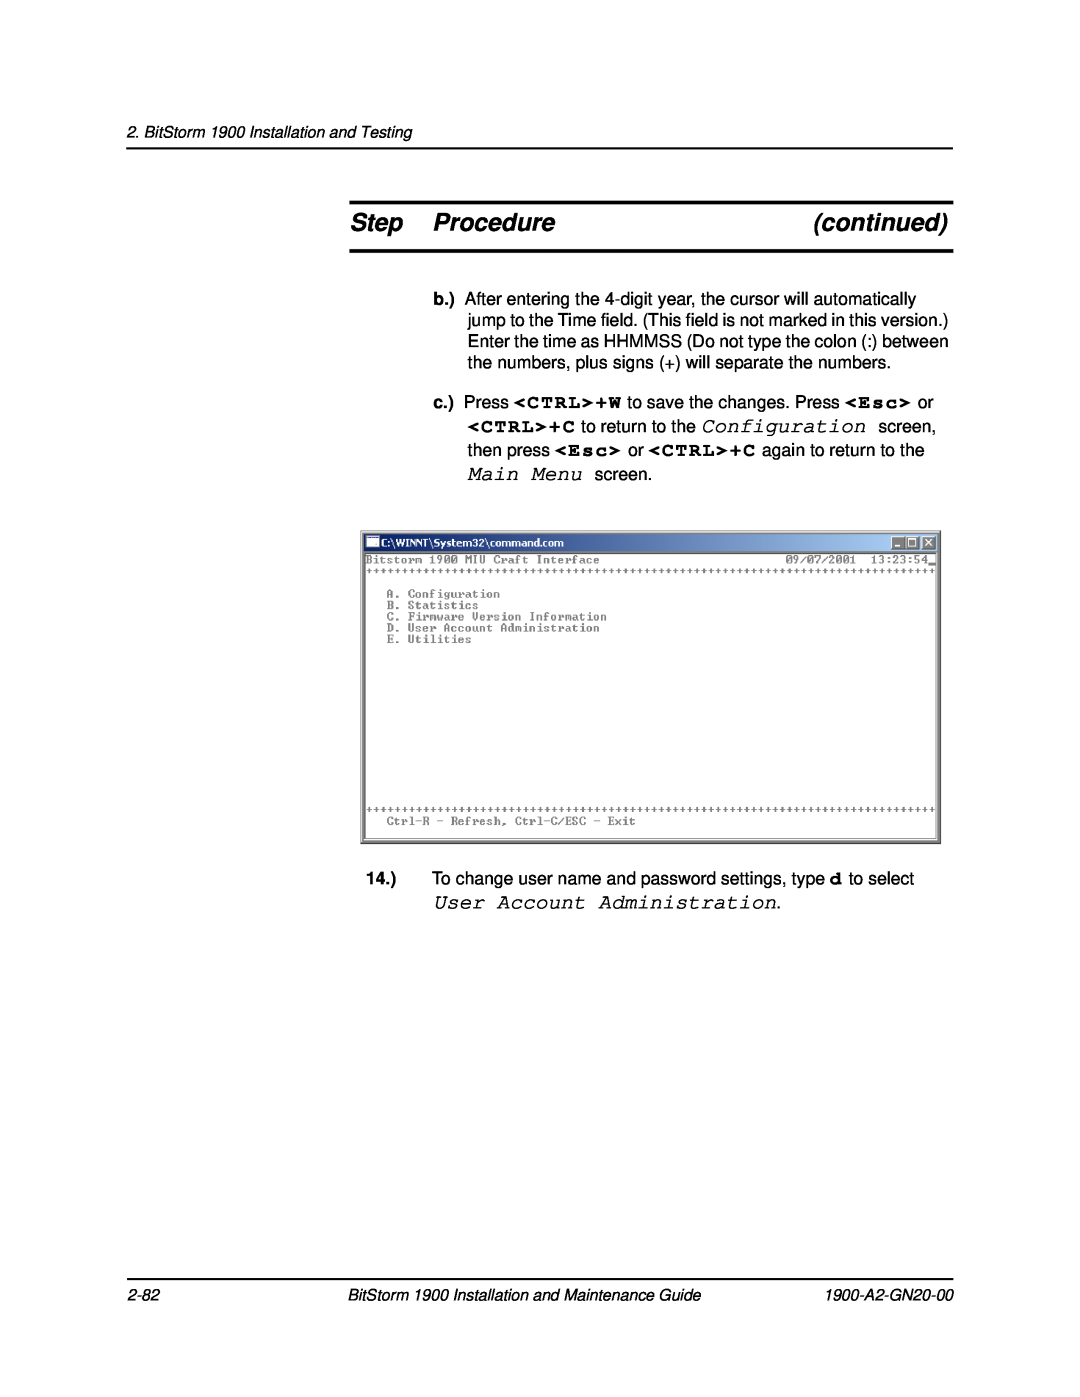 Paradyne 1900 manual User Account Administration, Step Procedure, continued 